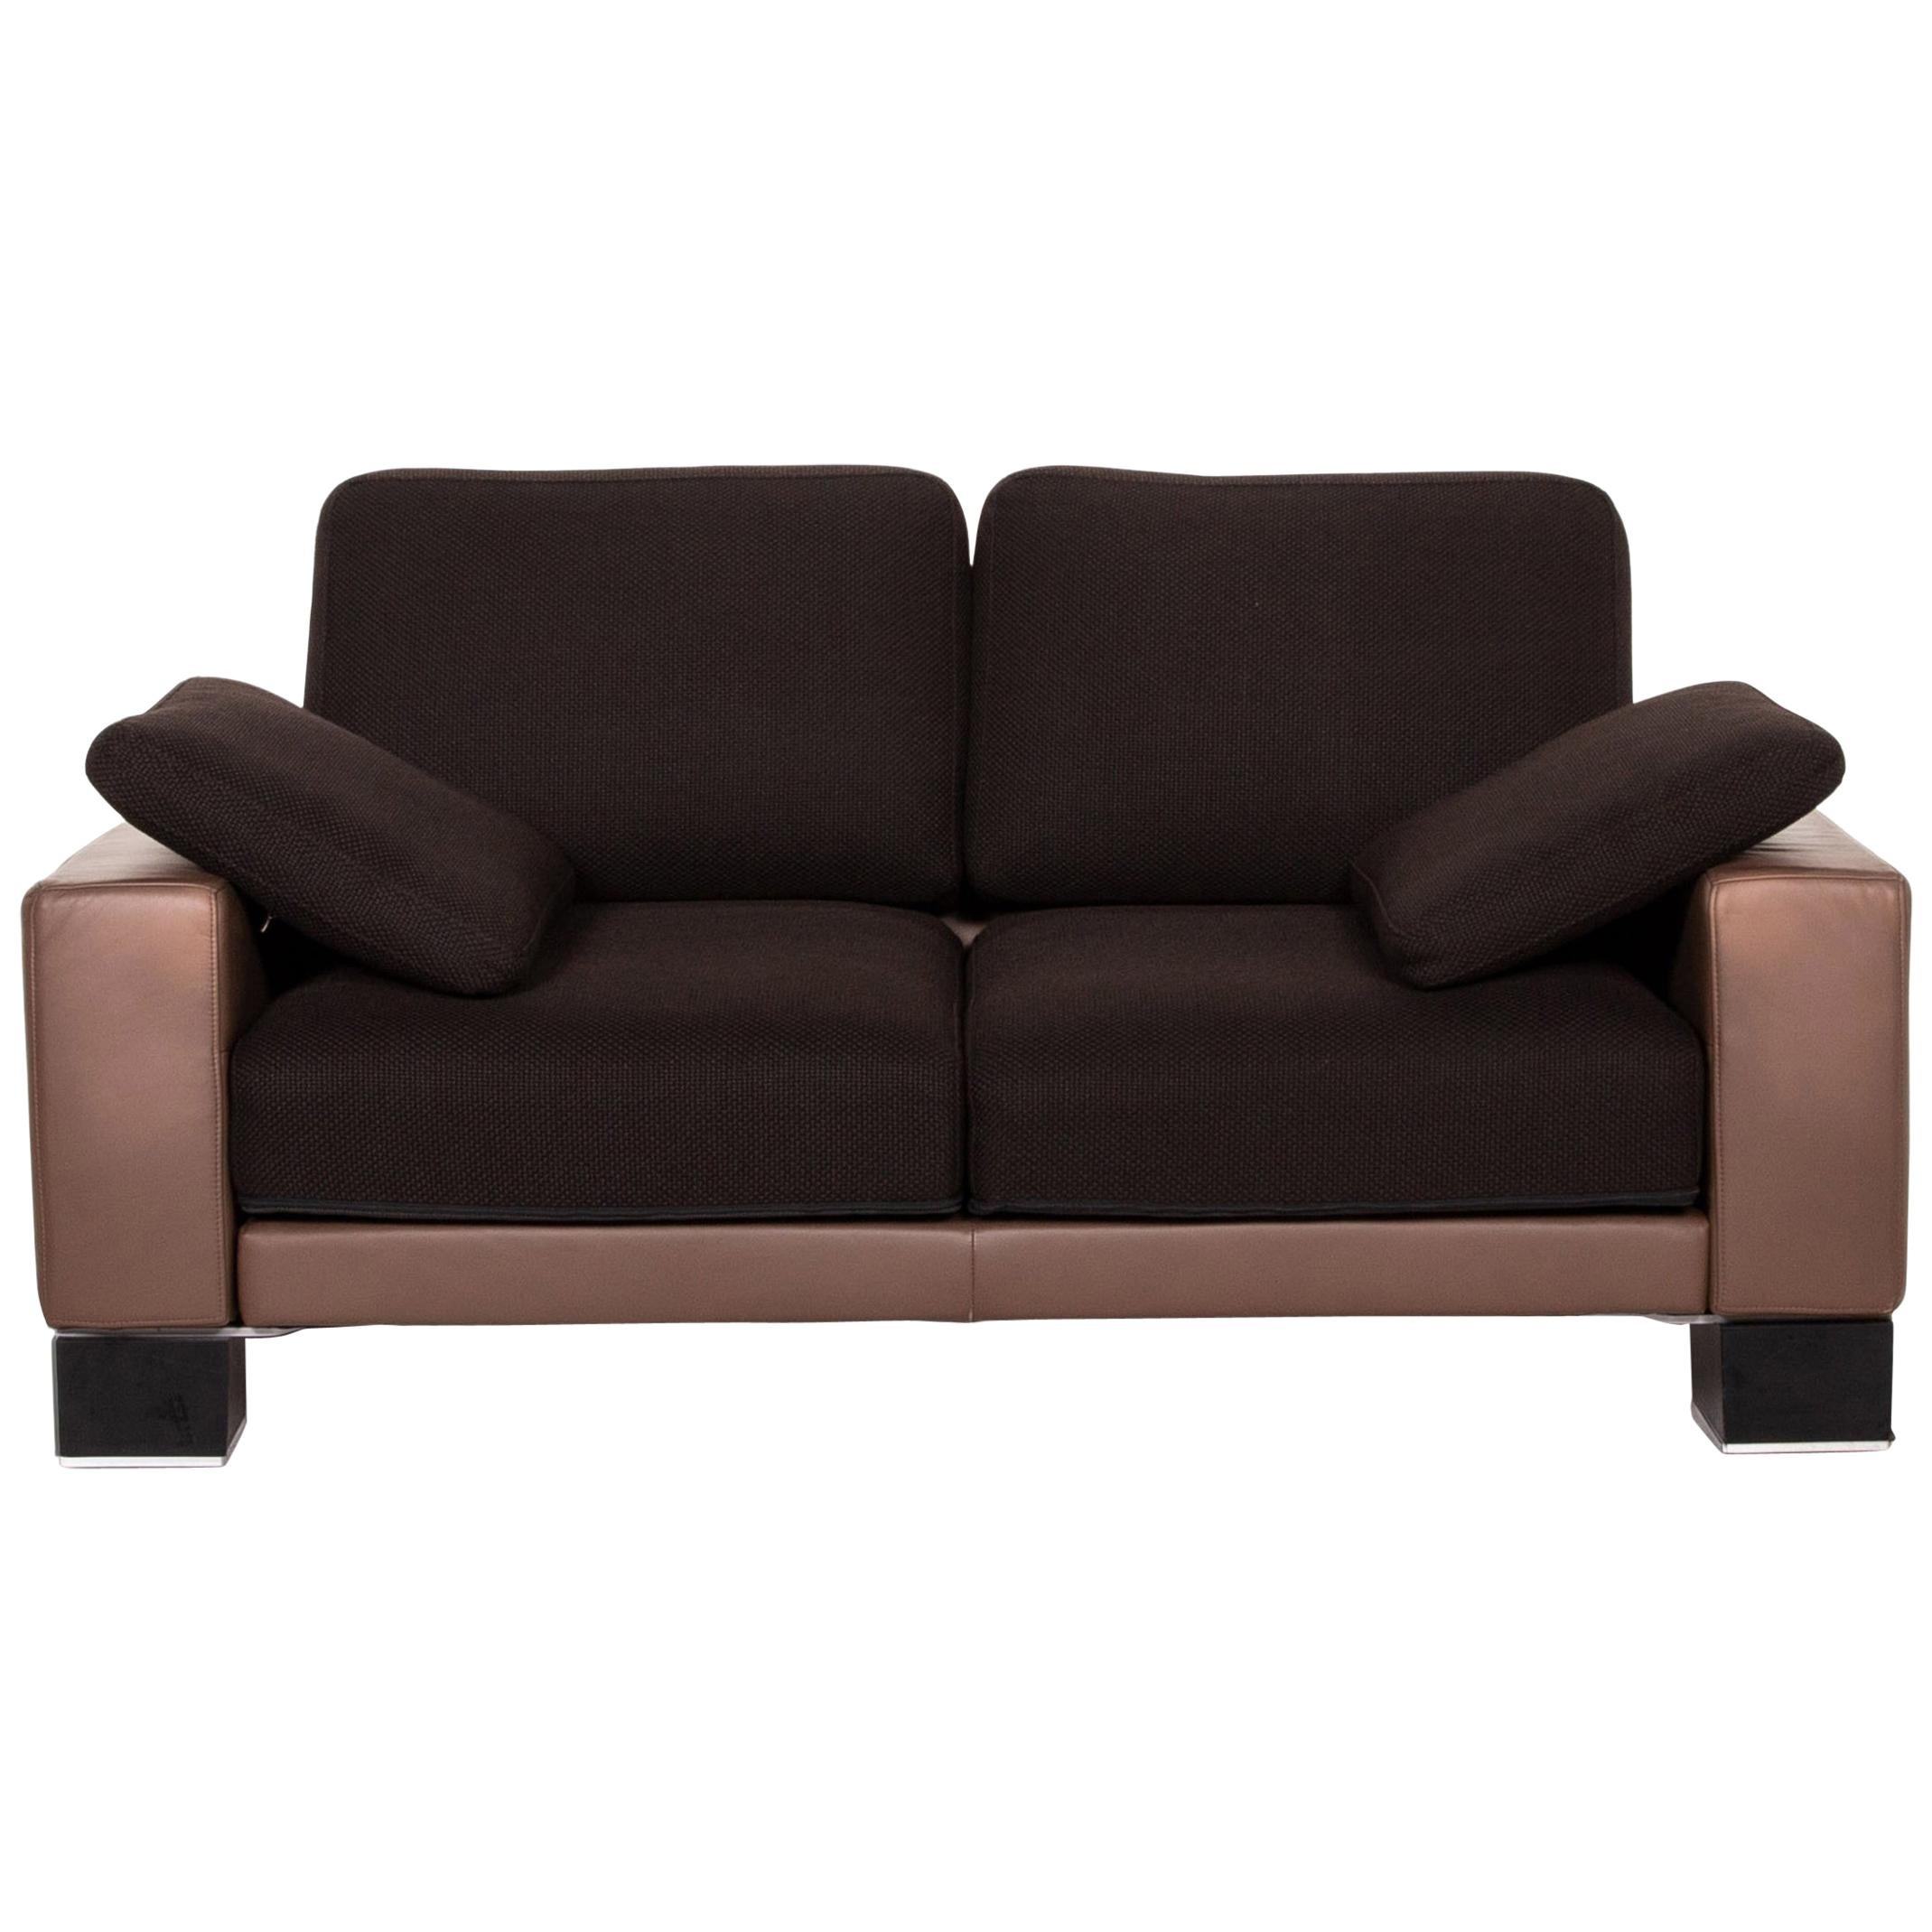 Rolf Benz Ego Leather Fabric Sofa Brown Dark Brown Two-Seat Function Couch